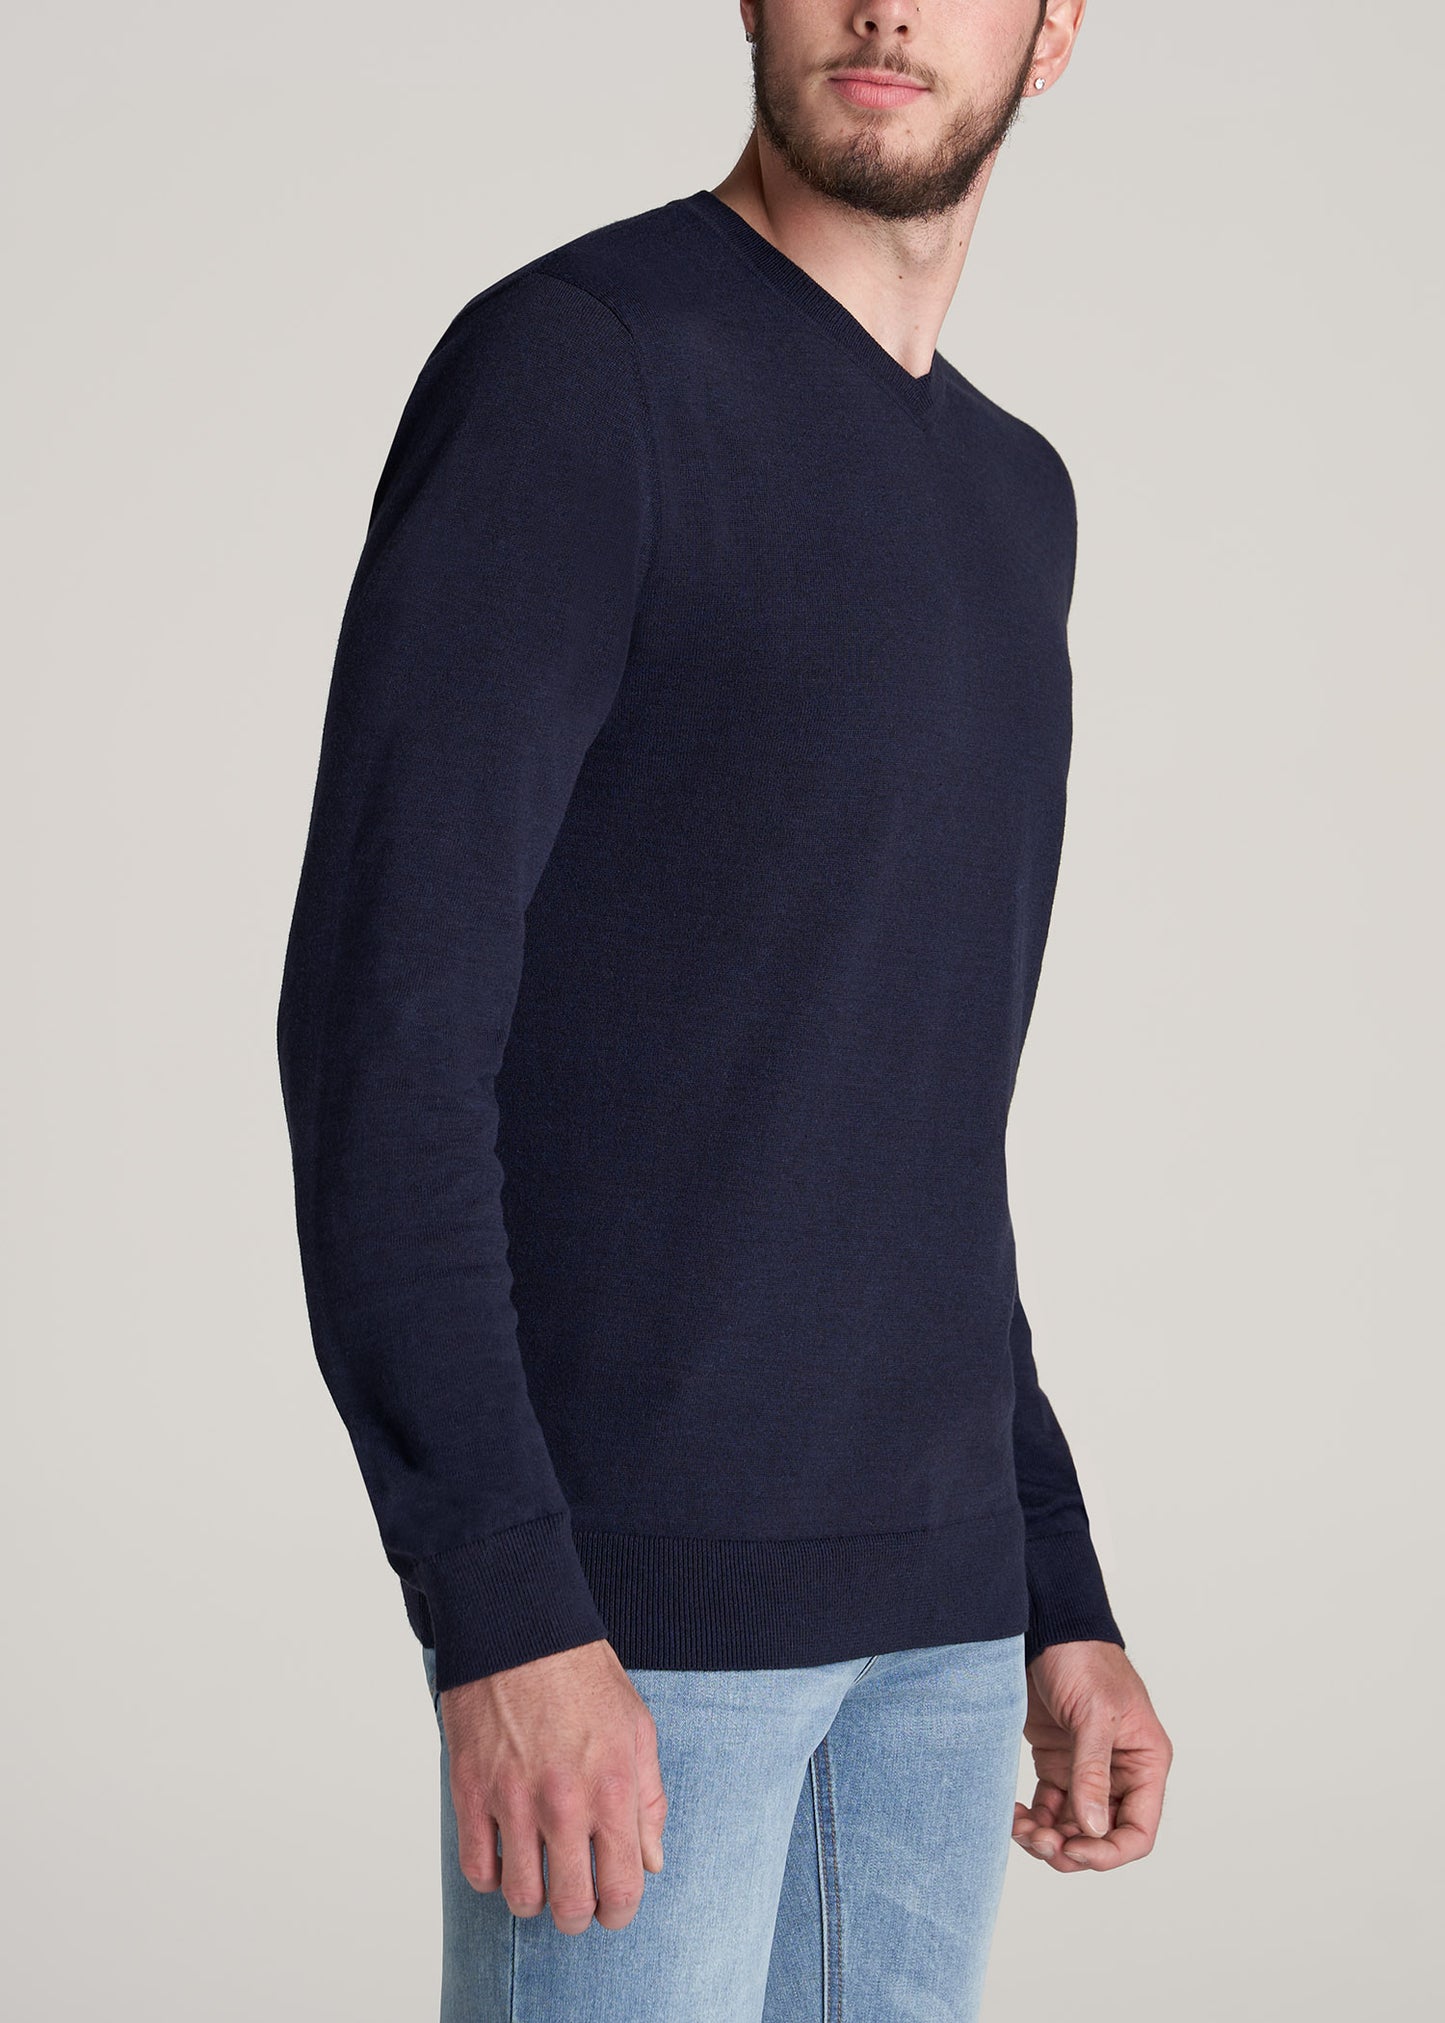 Men's Tall Everyday V-Neck Sweater Patriot Blue | American Tall